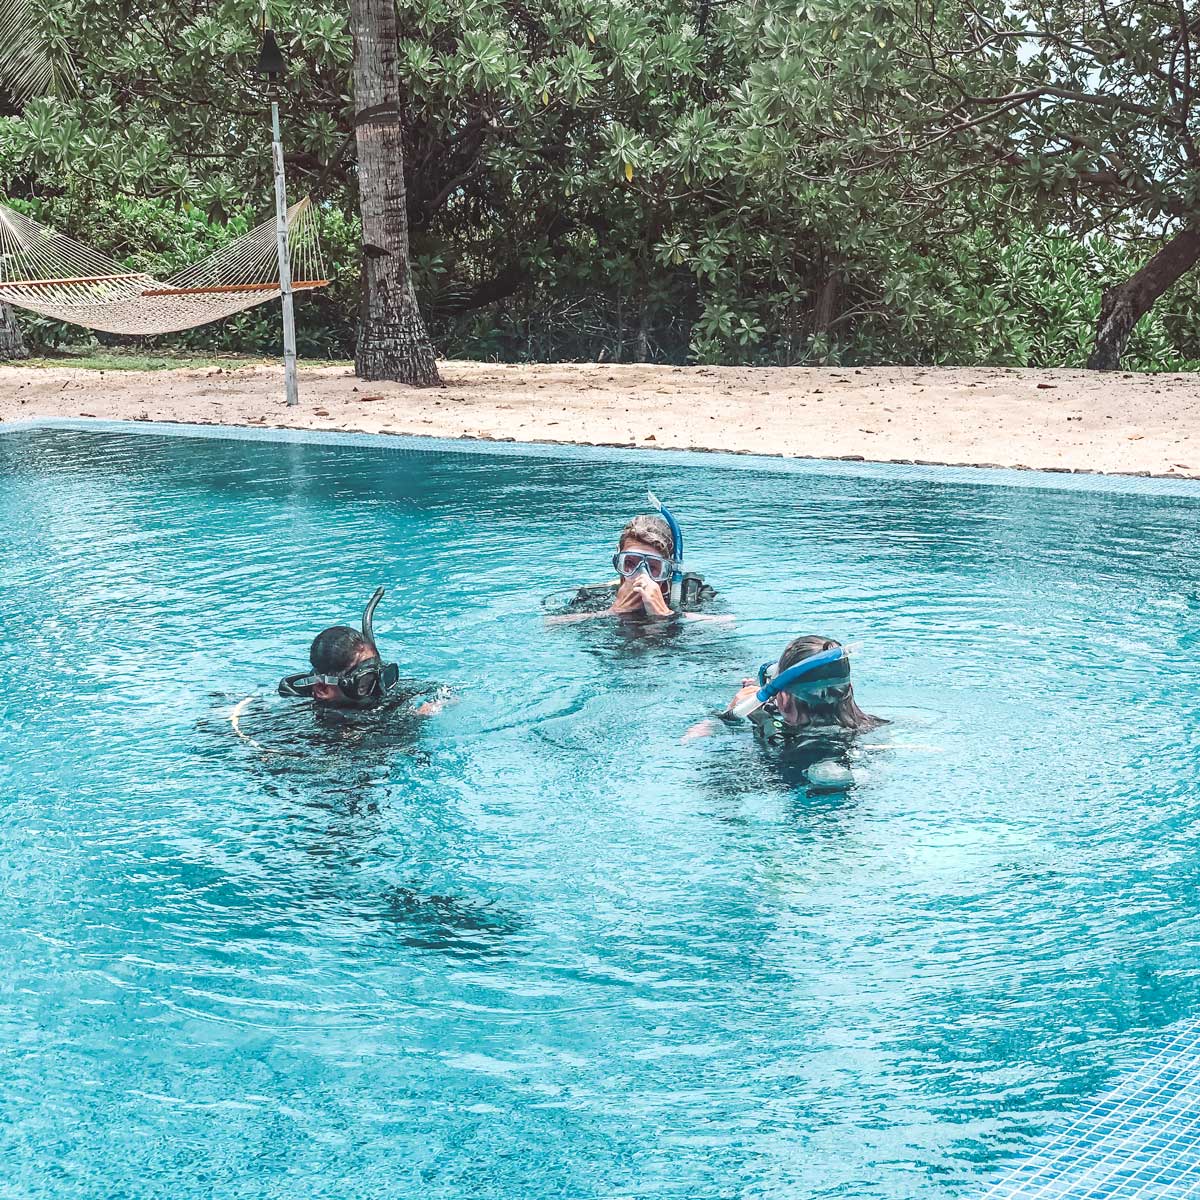 Hackett family learning to dive in the pool at the palms private residence before venturing into vomo open waters